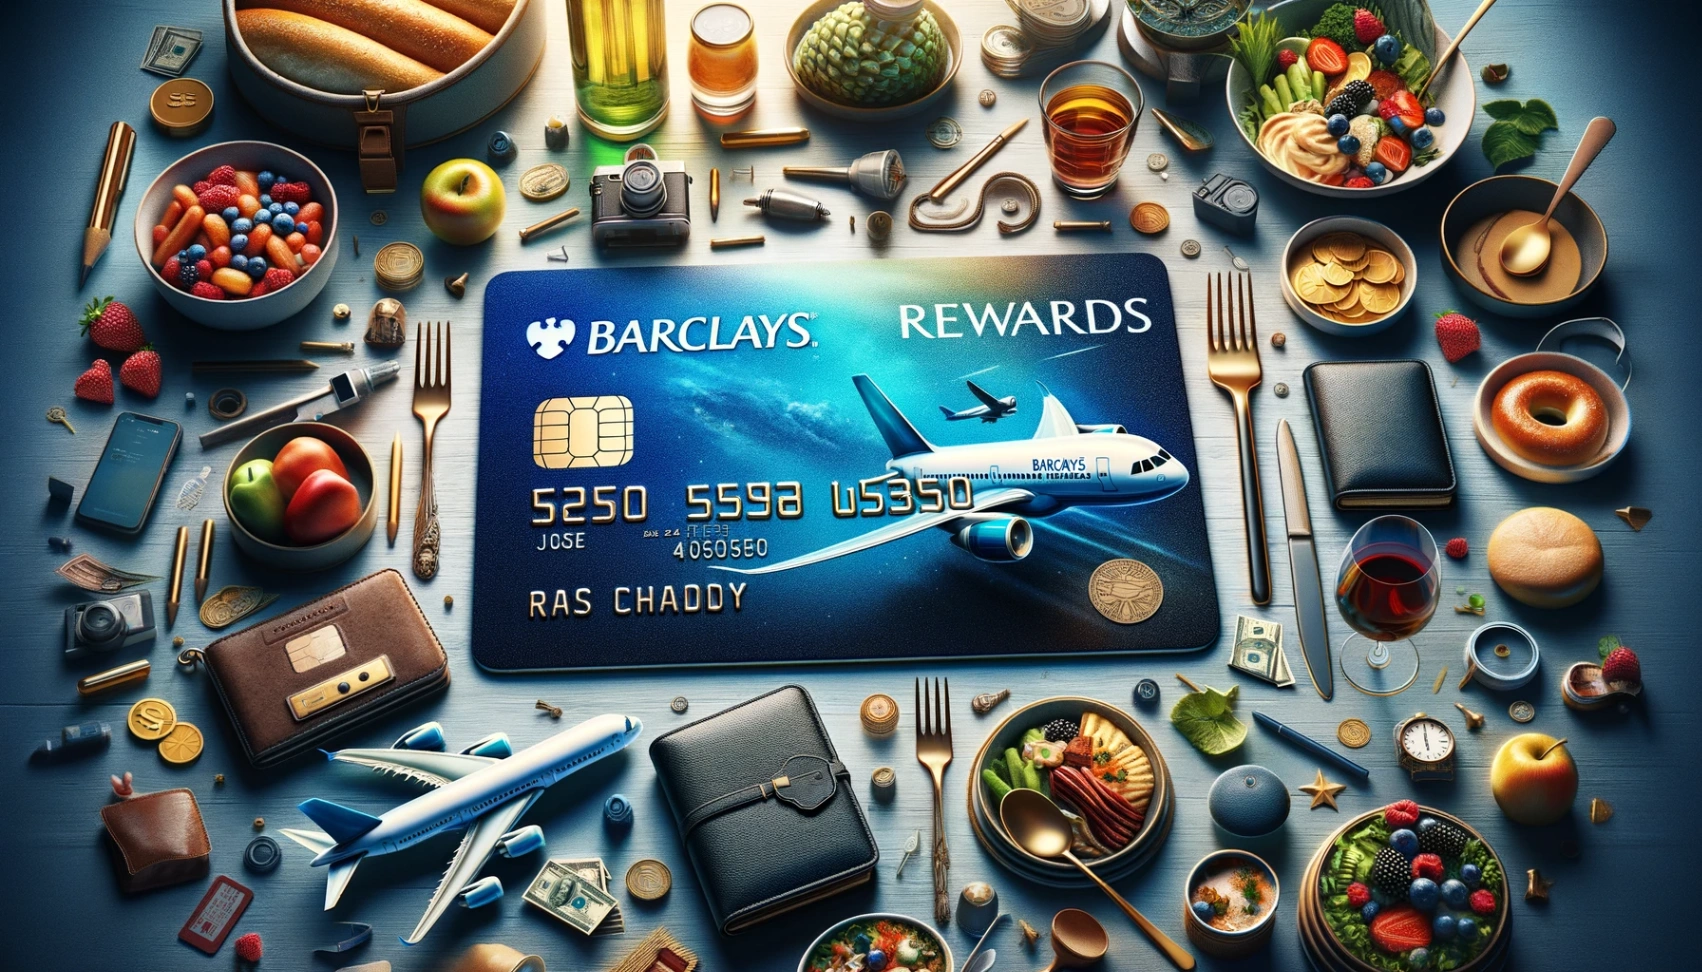 Barclays Rewards Credit Card: Discover How to Apply